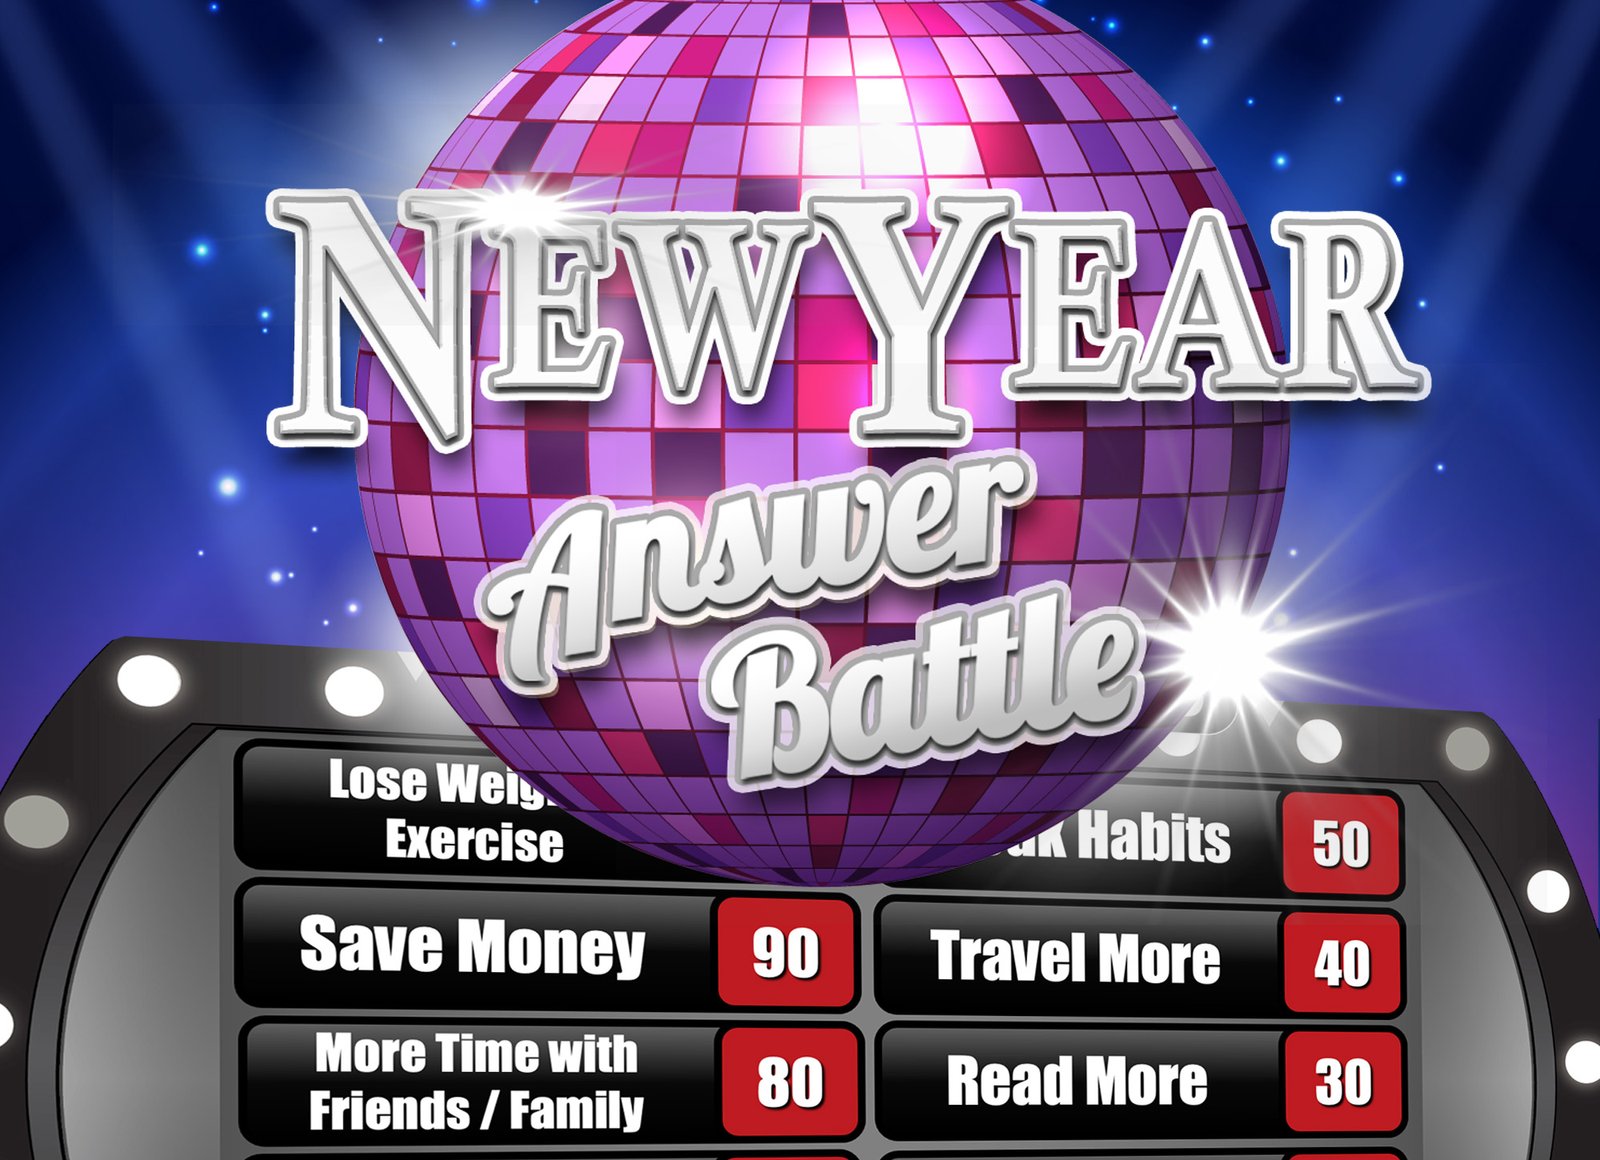 New Year S Eve Answer Battle Powerpoint Template Family Fun Holiday Game Youth Downloads